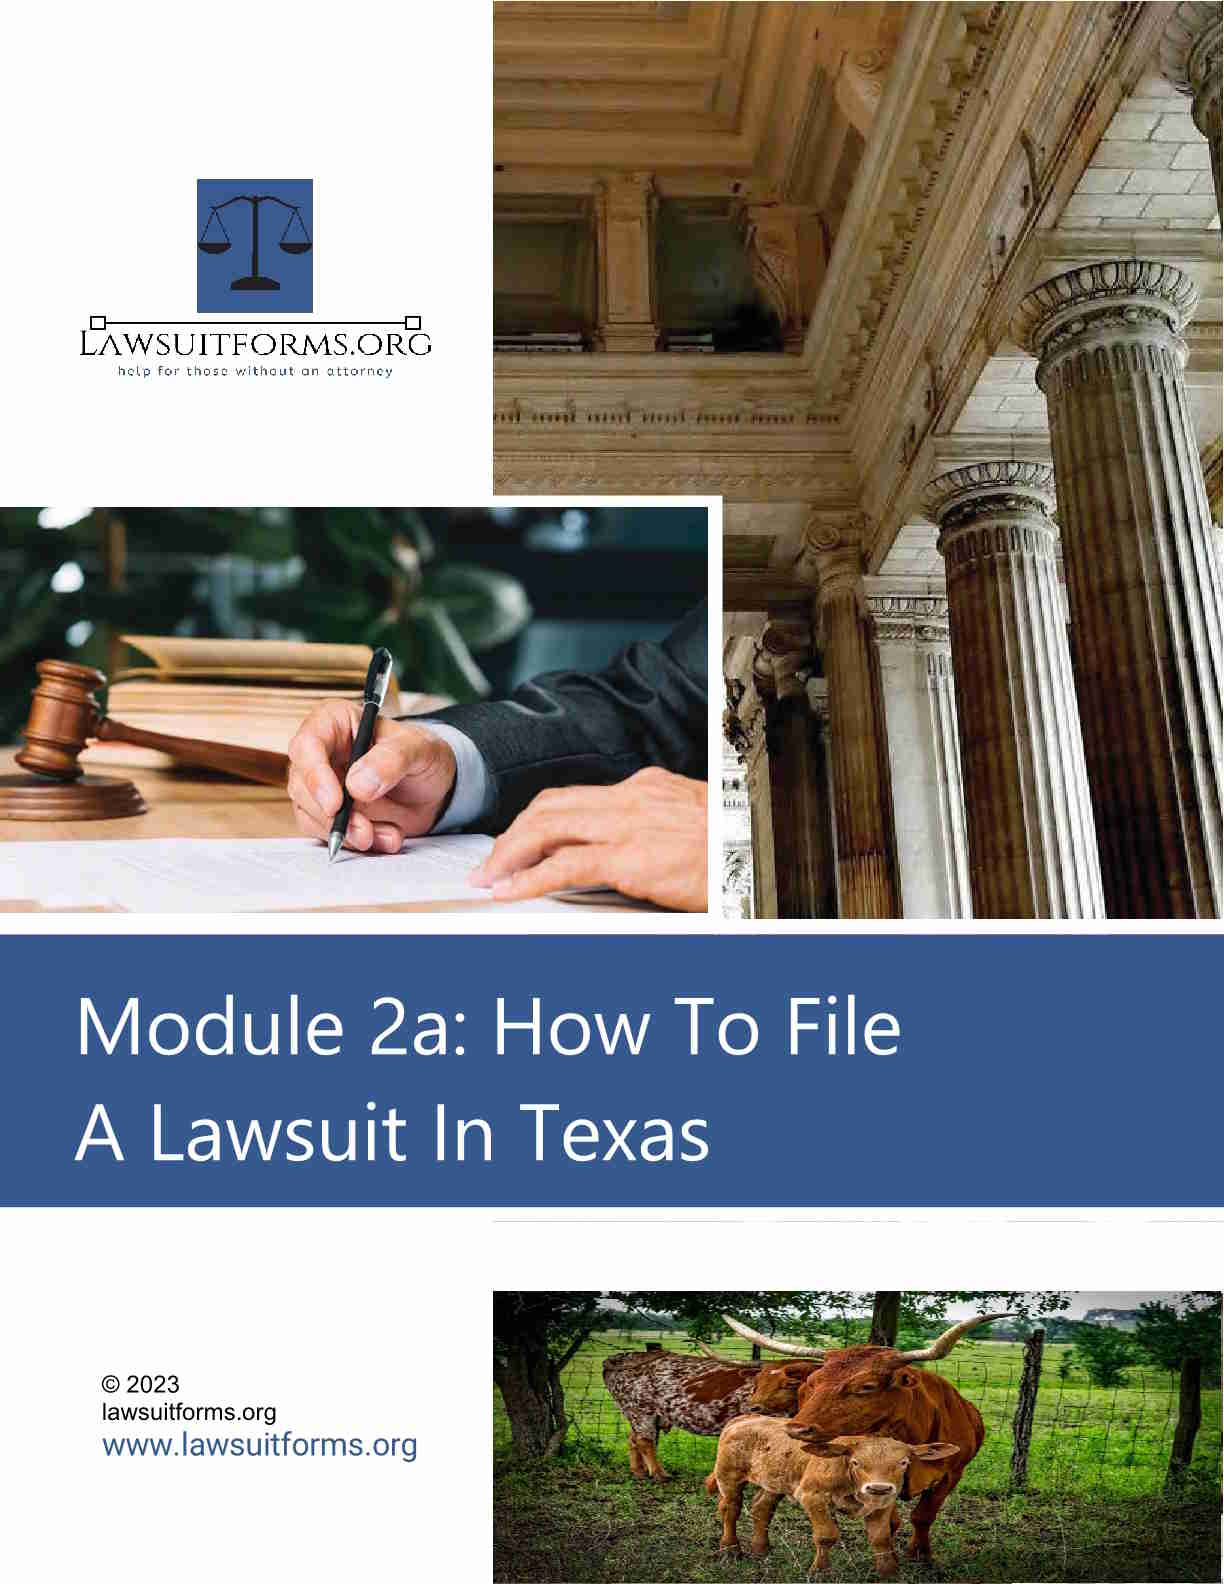 How to file a lawsuit in Texas